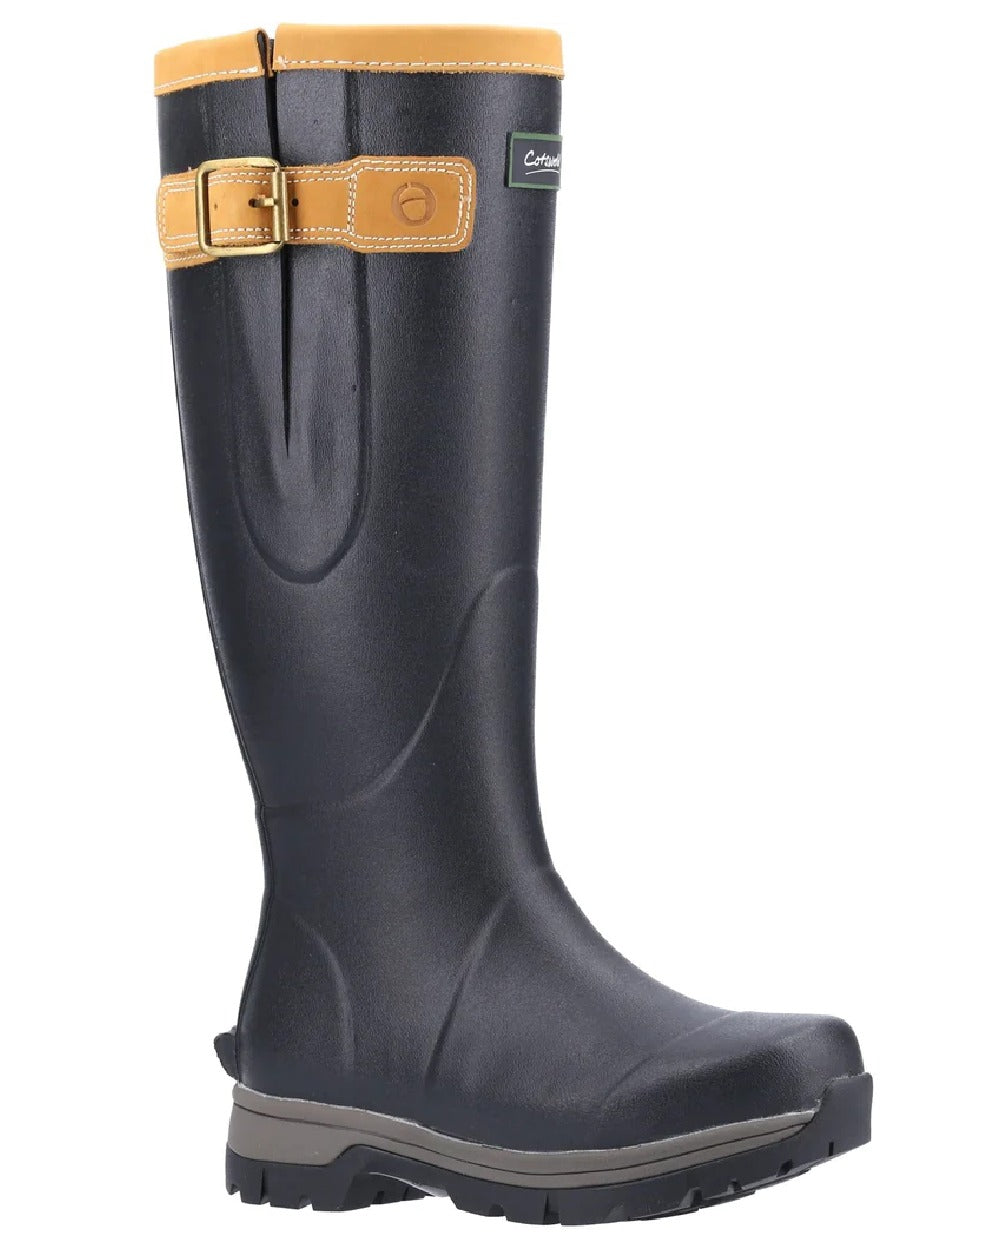 Cotswold Stratus Wellington Boots in Black 